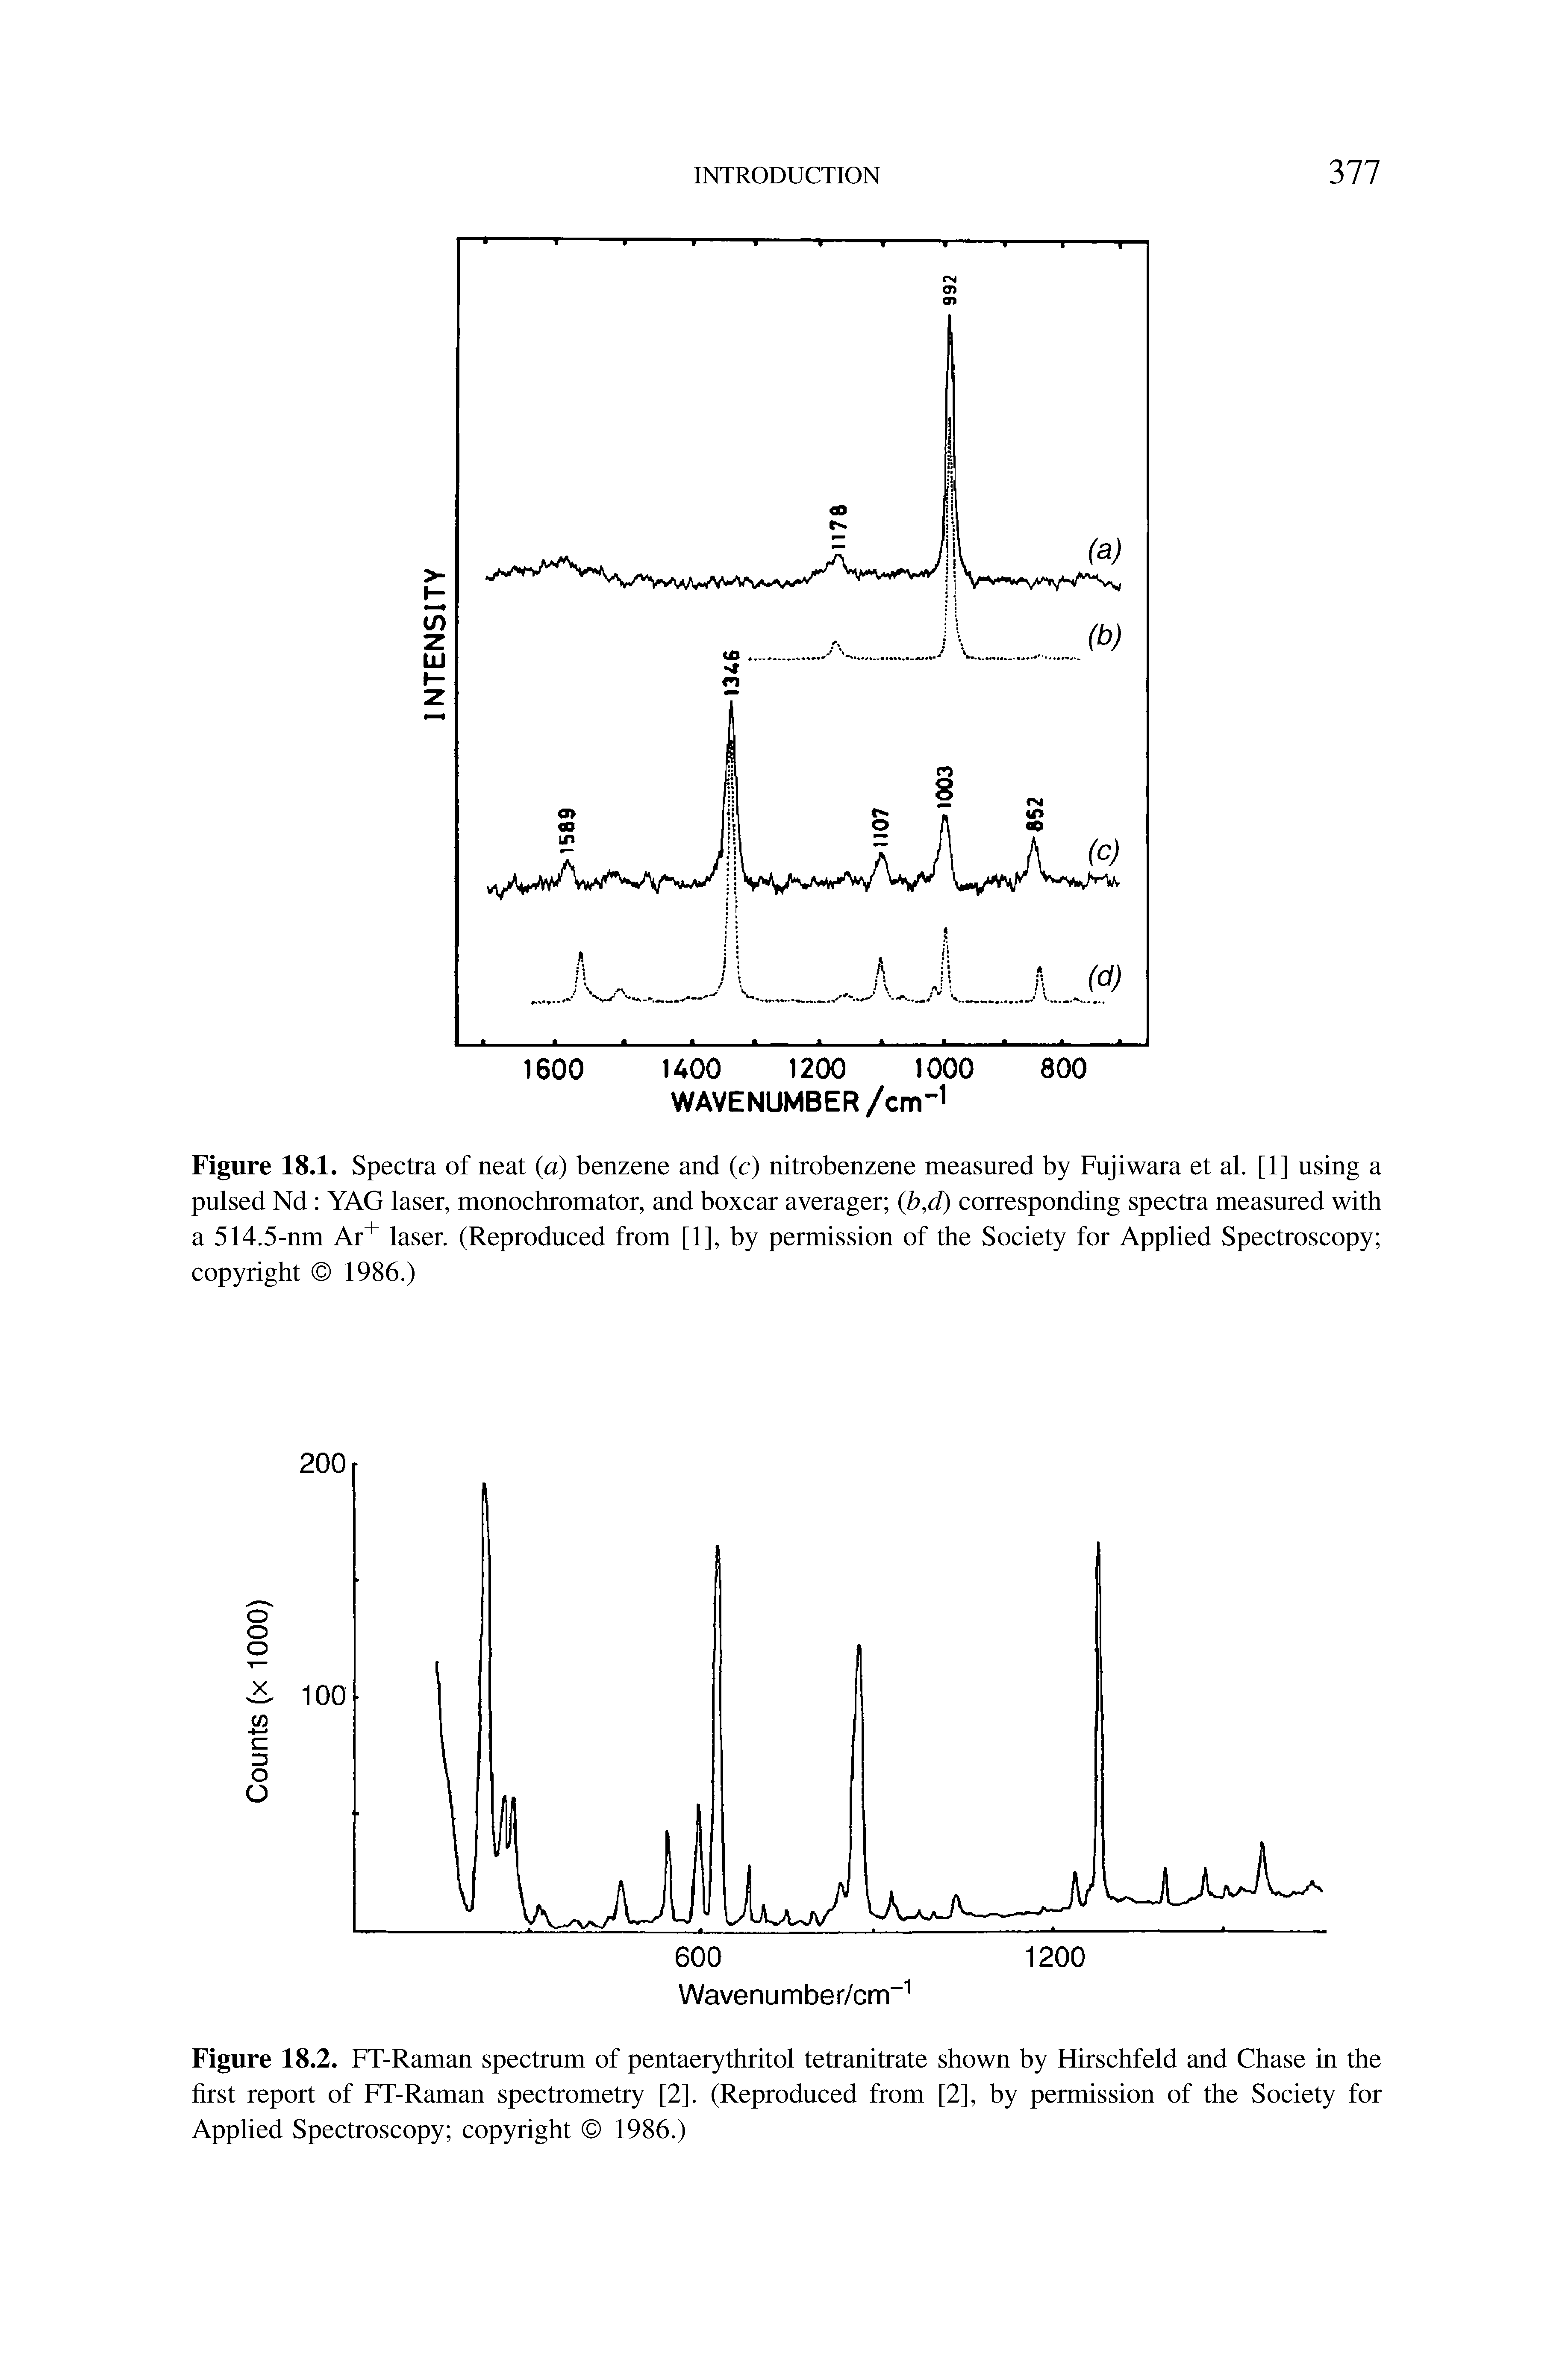 Figure 18.2. FT-Raman spectrum of pentaerythritol tetranitrate shown by Hirschfeld and Chase in the first report of FT-Raman spectrometry [2]. (Reproduced from [2], by permission of the Society for Applied Spectroscopy copyright 1986.)...